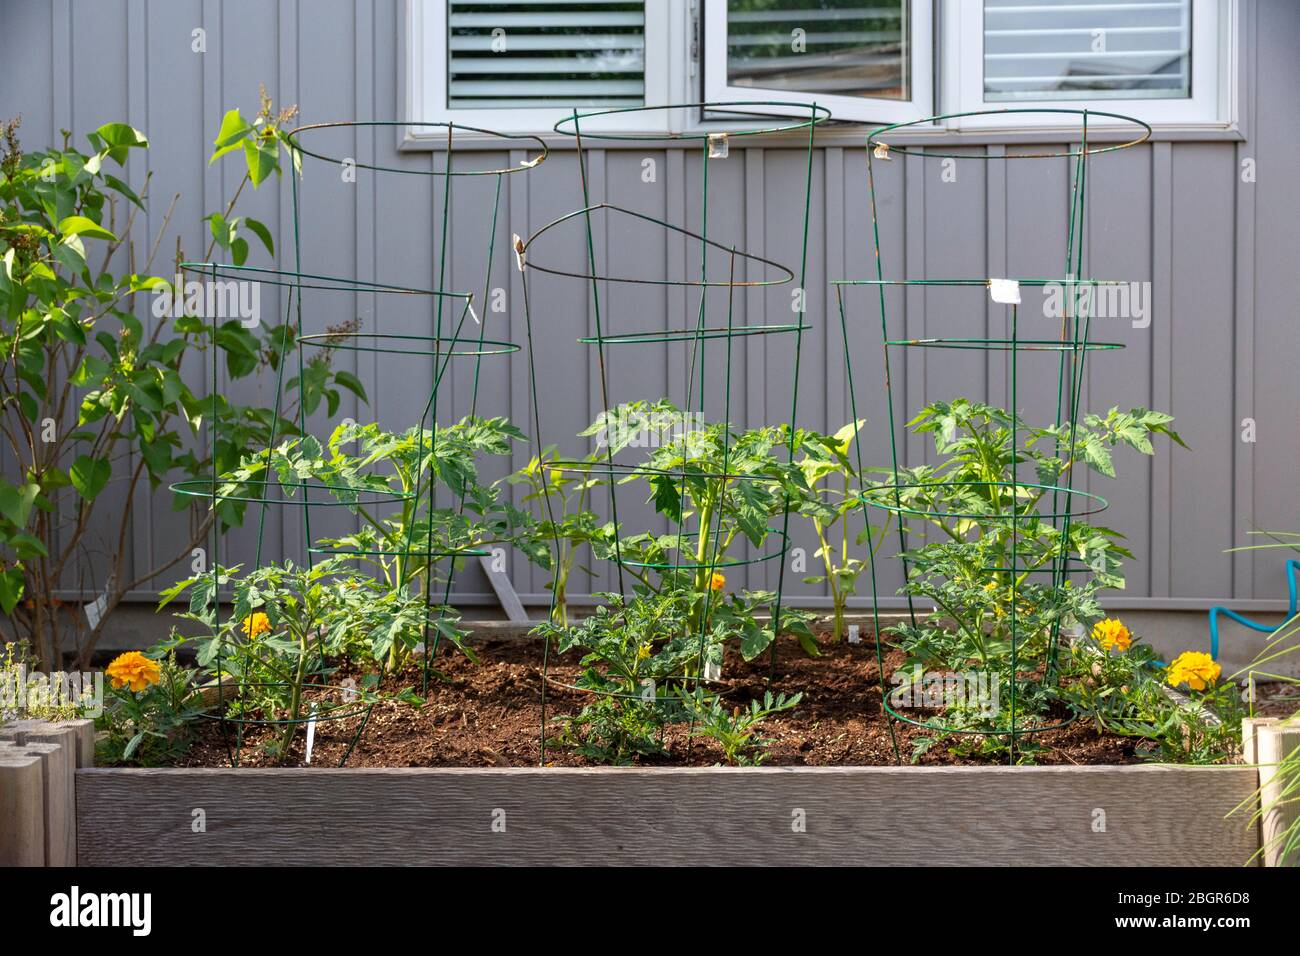 Part of the grow your own food movement, this backyard vegetable garden contains raised beds for growing vegetables and herbs throughout summer. Stock Photo